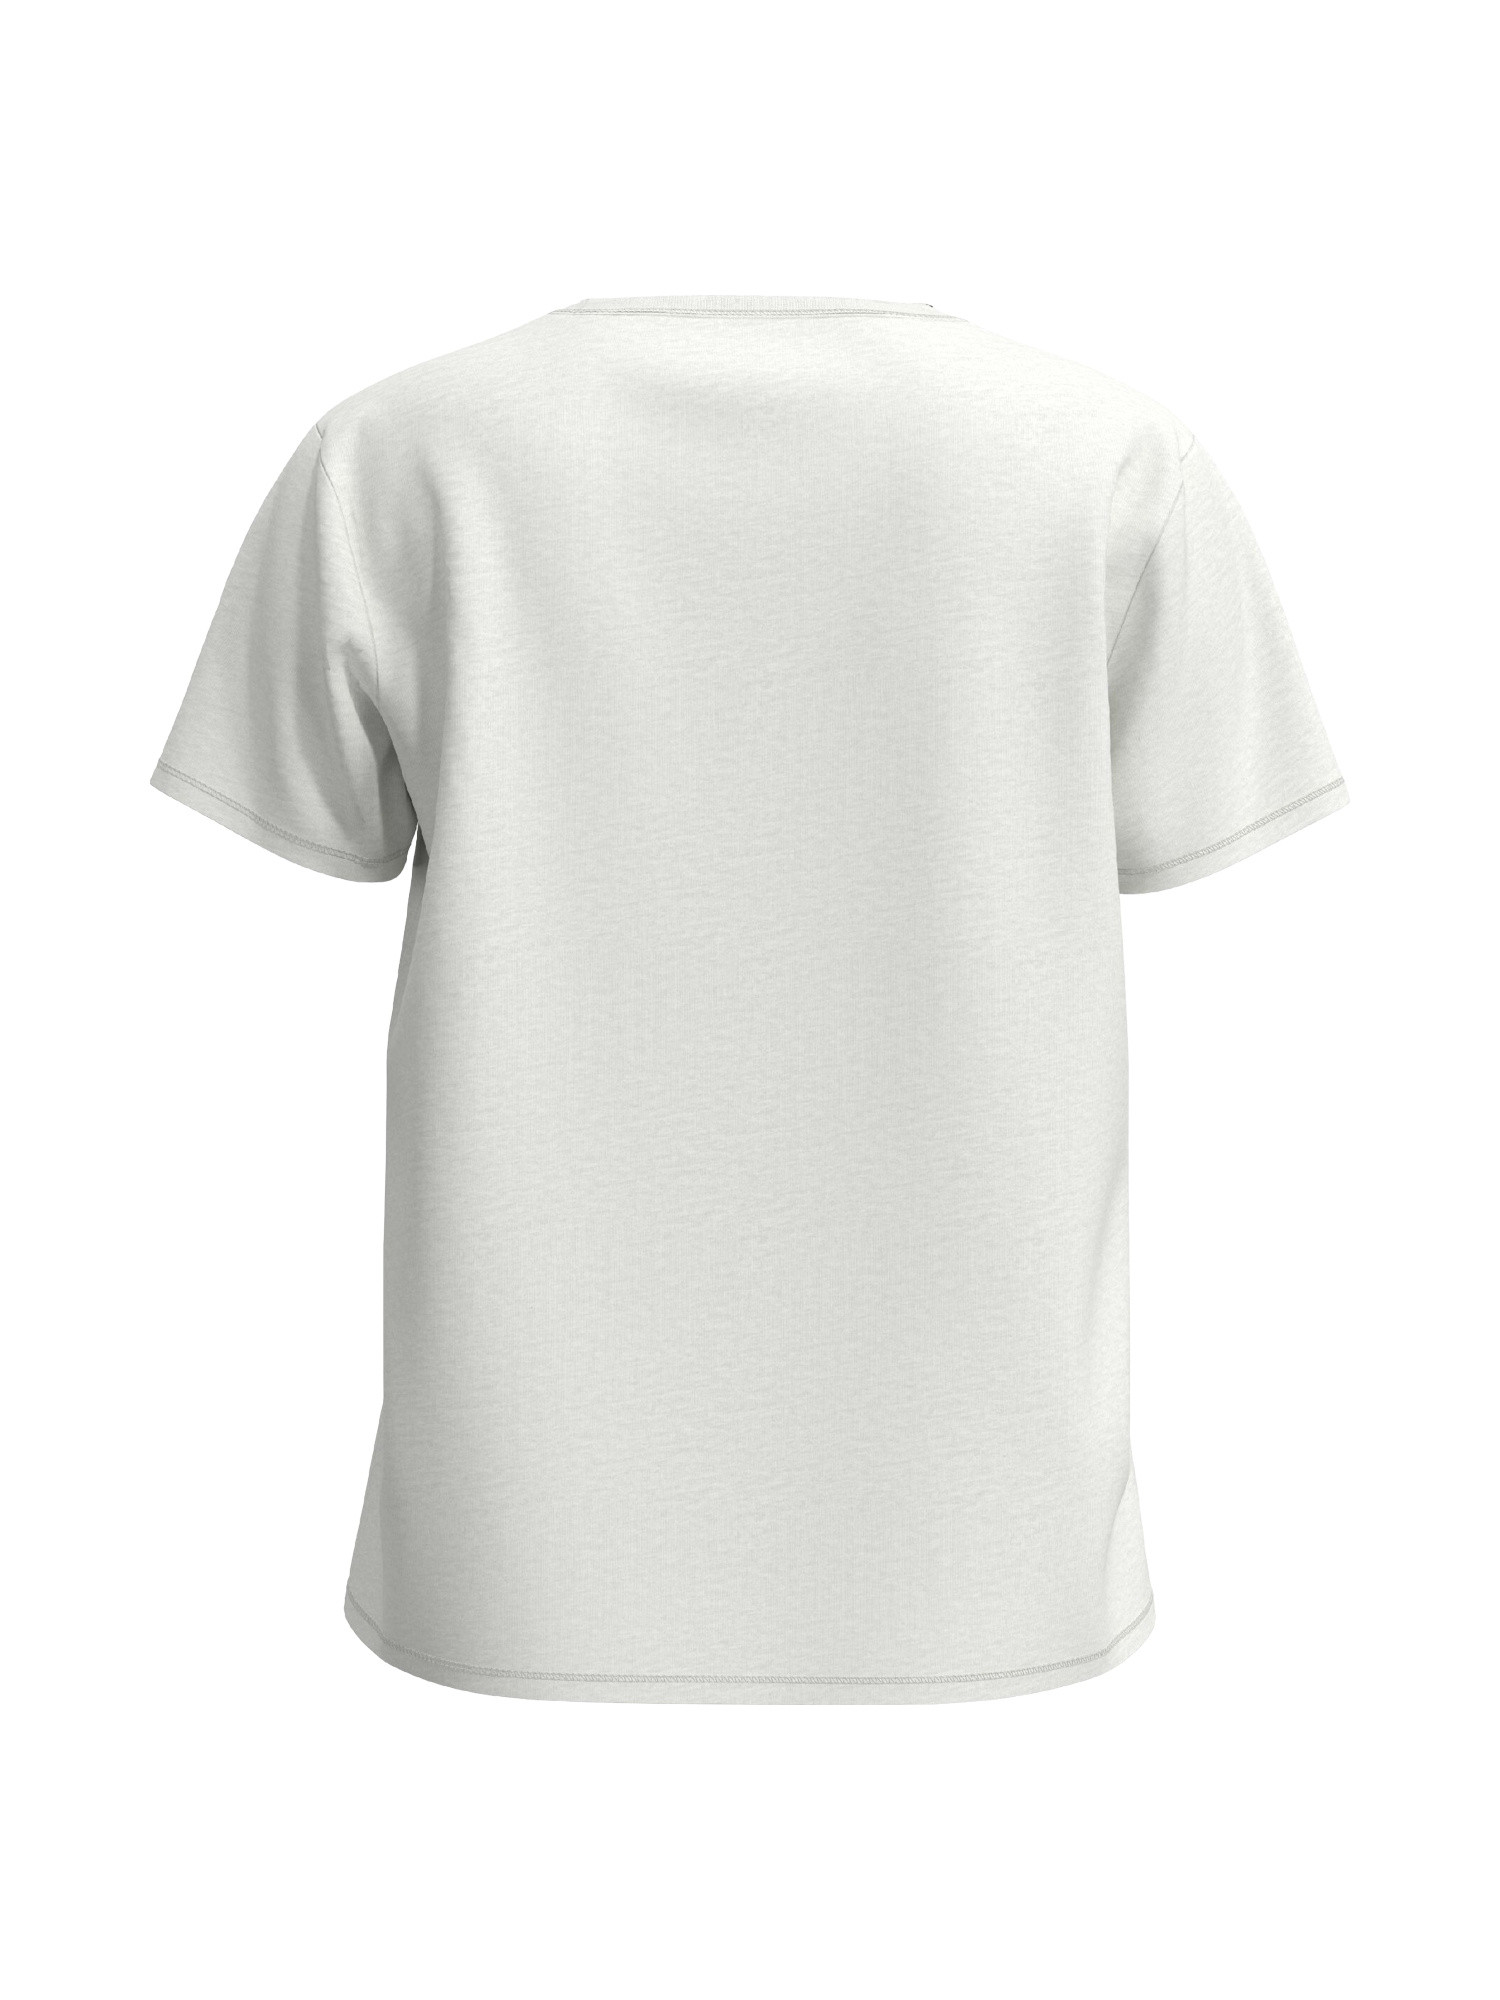 Pepe Jeans - Printed cotton T-shirt, White, large image number 1